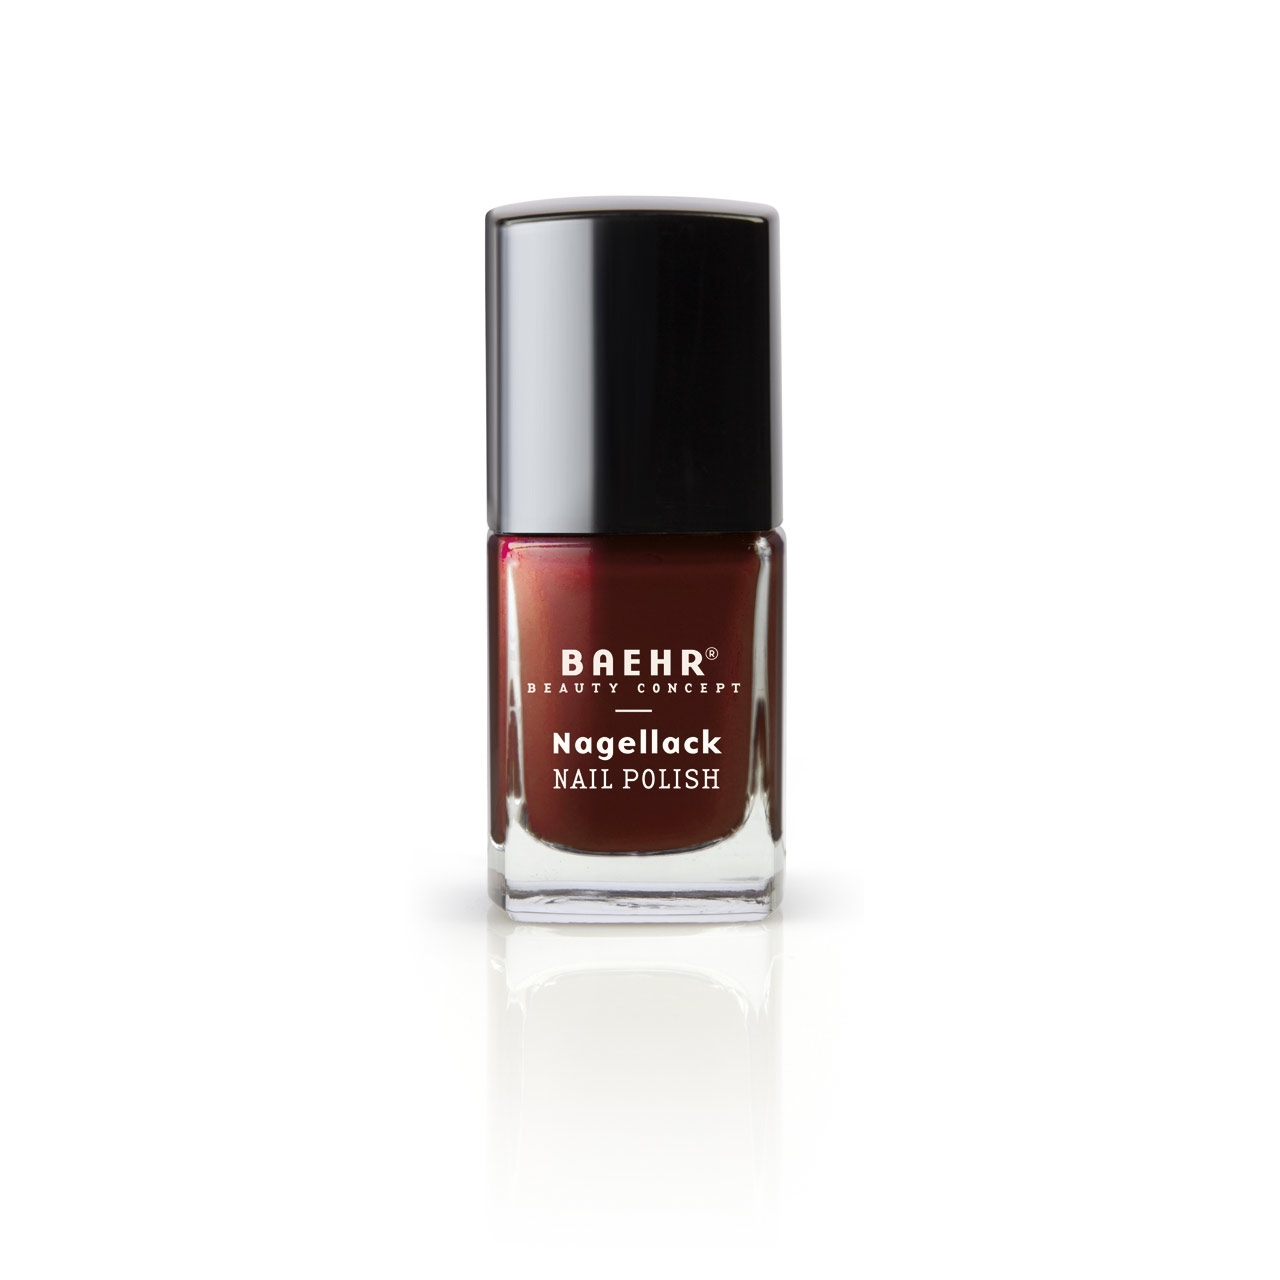 BAEHR BEAUTY CONCEPT - NAILS Nagellack cool cassis 11 ml